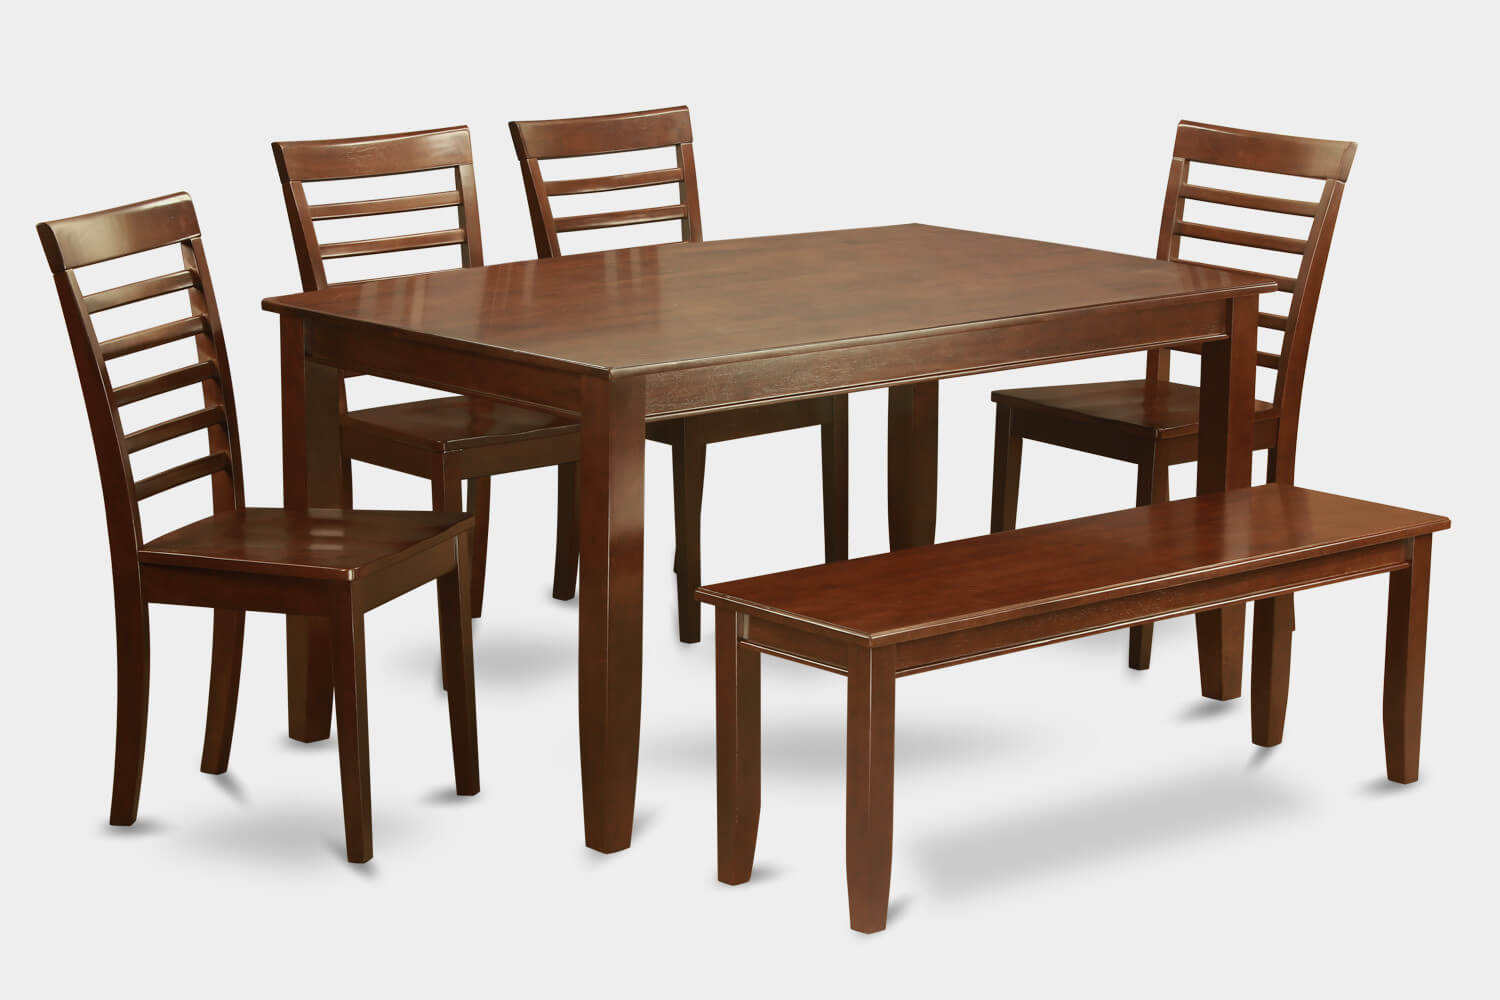 Dudley 6 Piece Dining Set